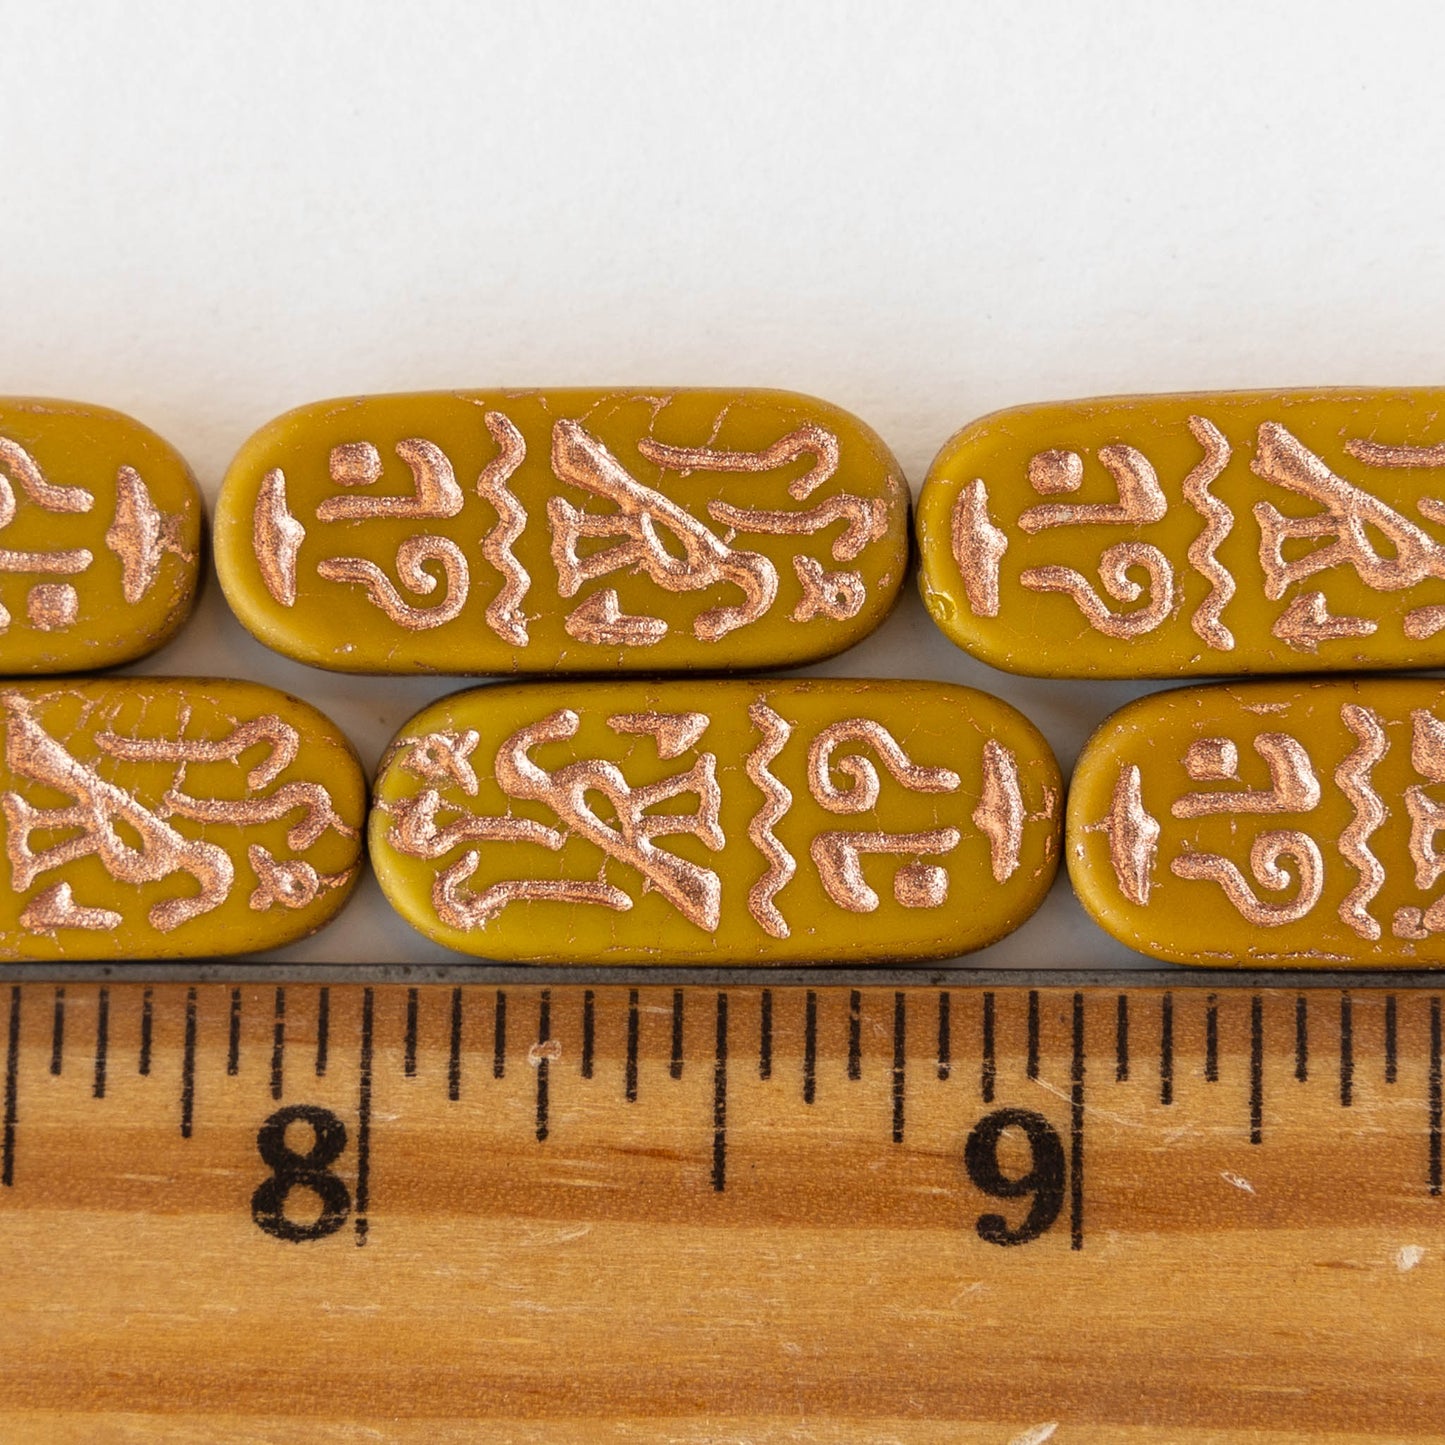 10x25mm Cartouche Beads - Ochre with a Copper Finish  - 4